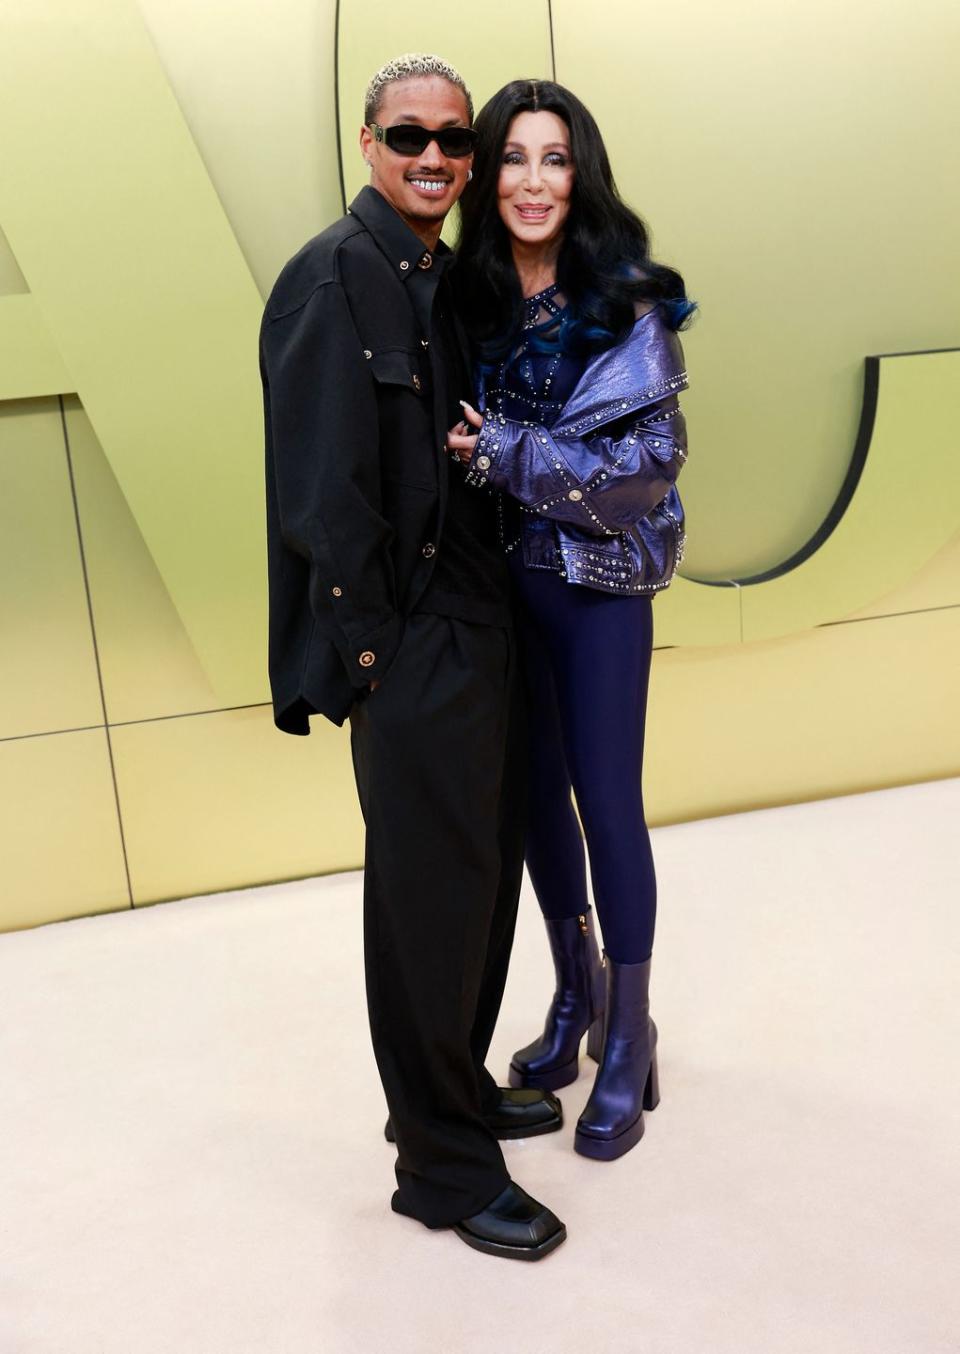 us singeractress cher and rapper alexander edwards arrive for the versace fallwinter 2023 fashion show on march 9, 2023, at the pacific design center in west hollywood, california photo by michael tran afp photo by michael tranafp via getty images